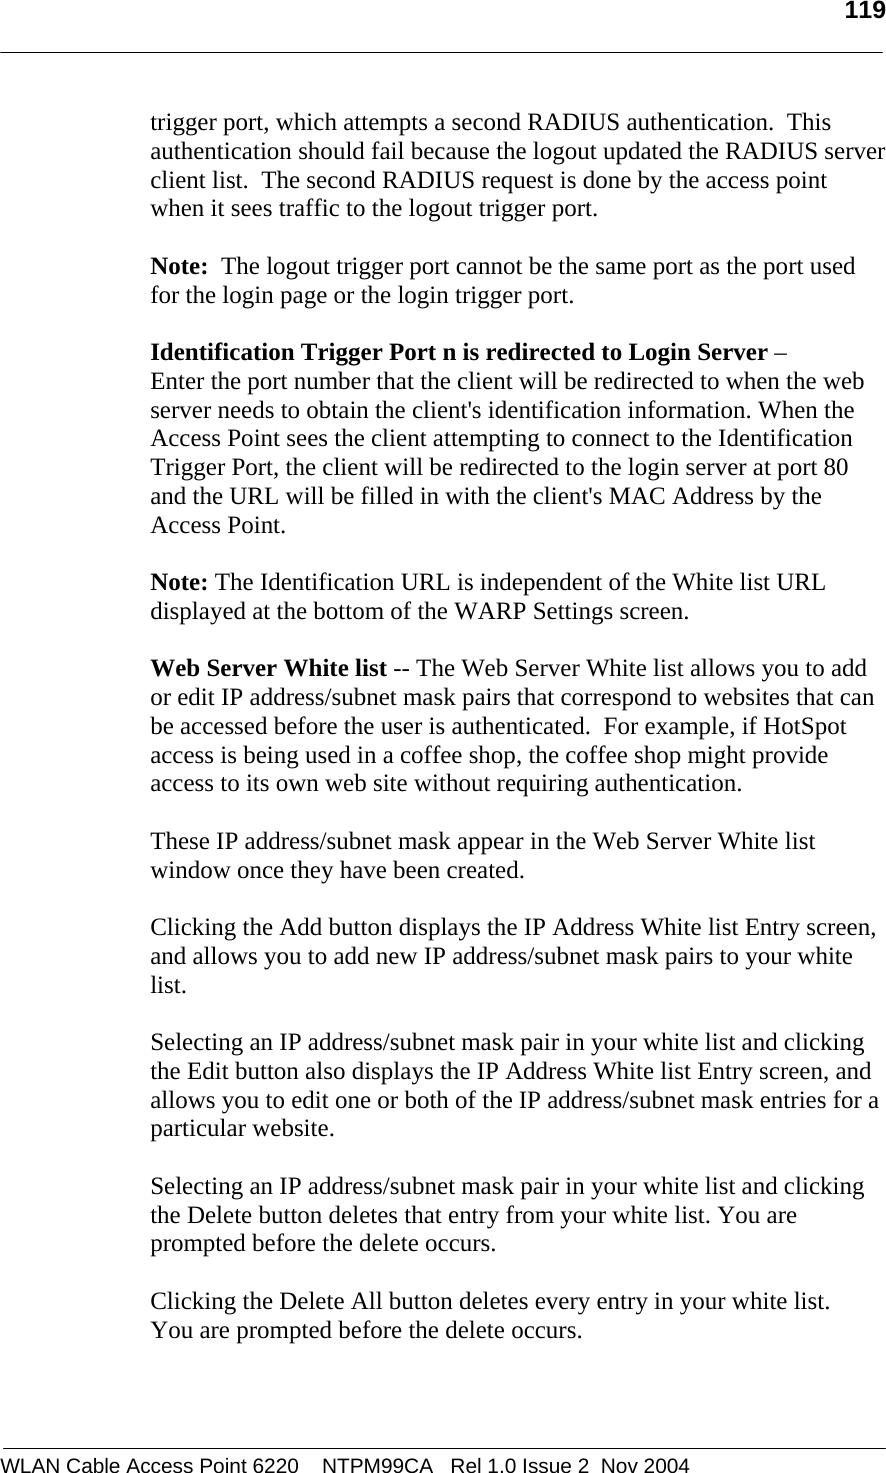   119  WLAN Cable Access Point 6220    NTPM99CA   Rel 1.0 Issue 2  Nov 2004 trigger port, which attempts a second RADIUS authentication.  This authentication should fail because the logout updated the RADIUS server client list.  The second RADIUS request is done by the access point when it sees traffic to the logout trigger port.  Note:  The logout trigger port cannot be the same port as the port used for the login page or the login trigger port.  Identification Trigger Port n is redirected to Login Server –  Enter the port number that the client will be redirected to when the web server needs to obtain the client&apos;s identification information. When the Access Point sees the client attempting to connect to the Identification Trigger Port, the client will be redirected to the login server at port 80 and the URL will be filled in with the client&apos;s MAC Address by the Access Point.   Note: The Identification URL is independent of the White list URL displayed at the bottom of the WARP Settings screen.  Web Server White list -- The Web Server White list allows you to add or edit IP address/subnet mask pairs that correspond to websites that can be accessed before the user is authenticated.  For example, if HotSpot access is being used in a coffee shop, the coffee shop might provide access to its own web site without requiring authentication.  These IP address/subnet mask appear in the Web Server White list window once they have been created.  Clicking the Add button displays the IP Address White list Entry screen, and allows you to add new IP address/subnet mask pairs to your white list.  Selecting an IP address/subnet mask pair in your white list and clicking the Edit button also displays the IP Address White list Entry screen, and allows you to edit one or both of the IP address/subnet mask entries for a particular website.    Selecting an IP address/subnet mask pair in your white list and clicking the Delete button deletes that entry from your white list. You are prompted before the delete occurs.  Clicking the Delete All button deletes every entry in your white list.  You are prompted before the delete occurs.  